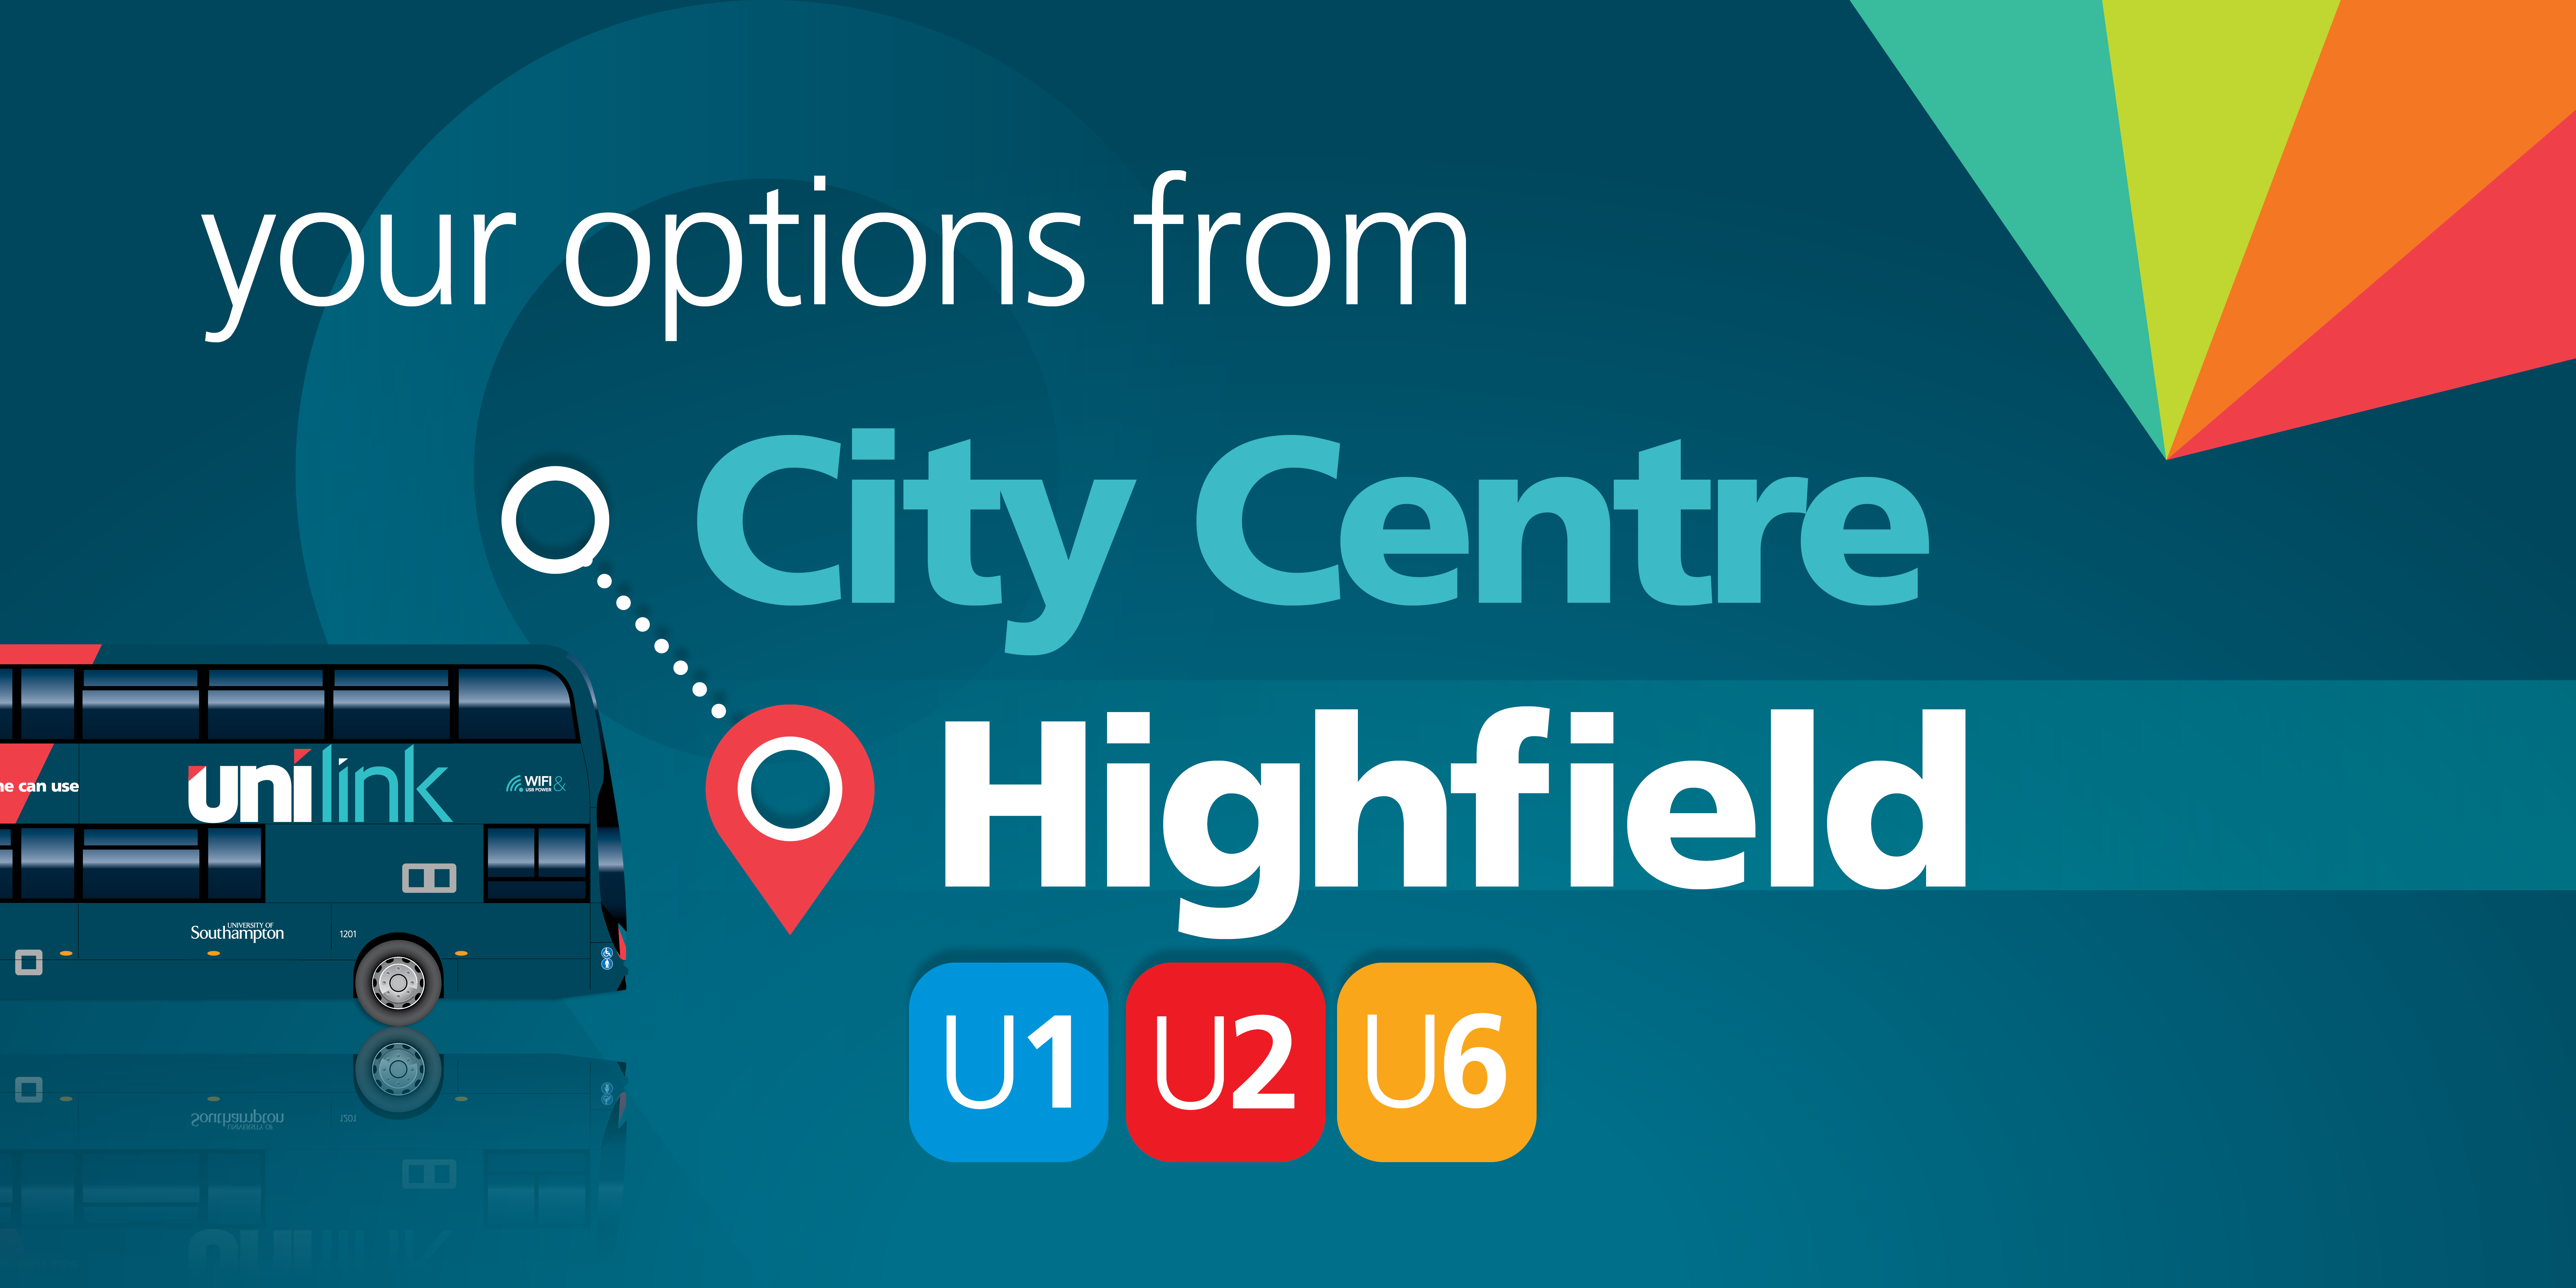 Your options from City Centre to Highfield image with a Unilink Bus